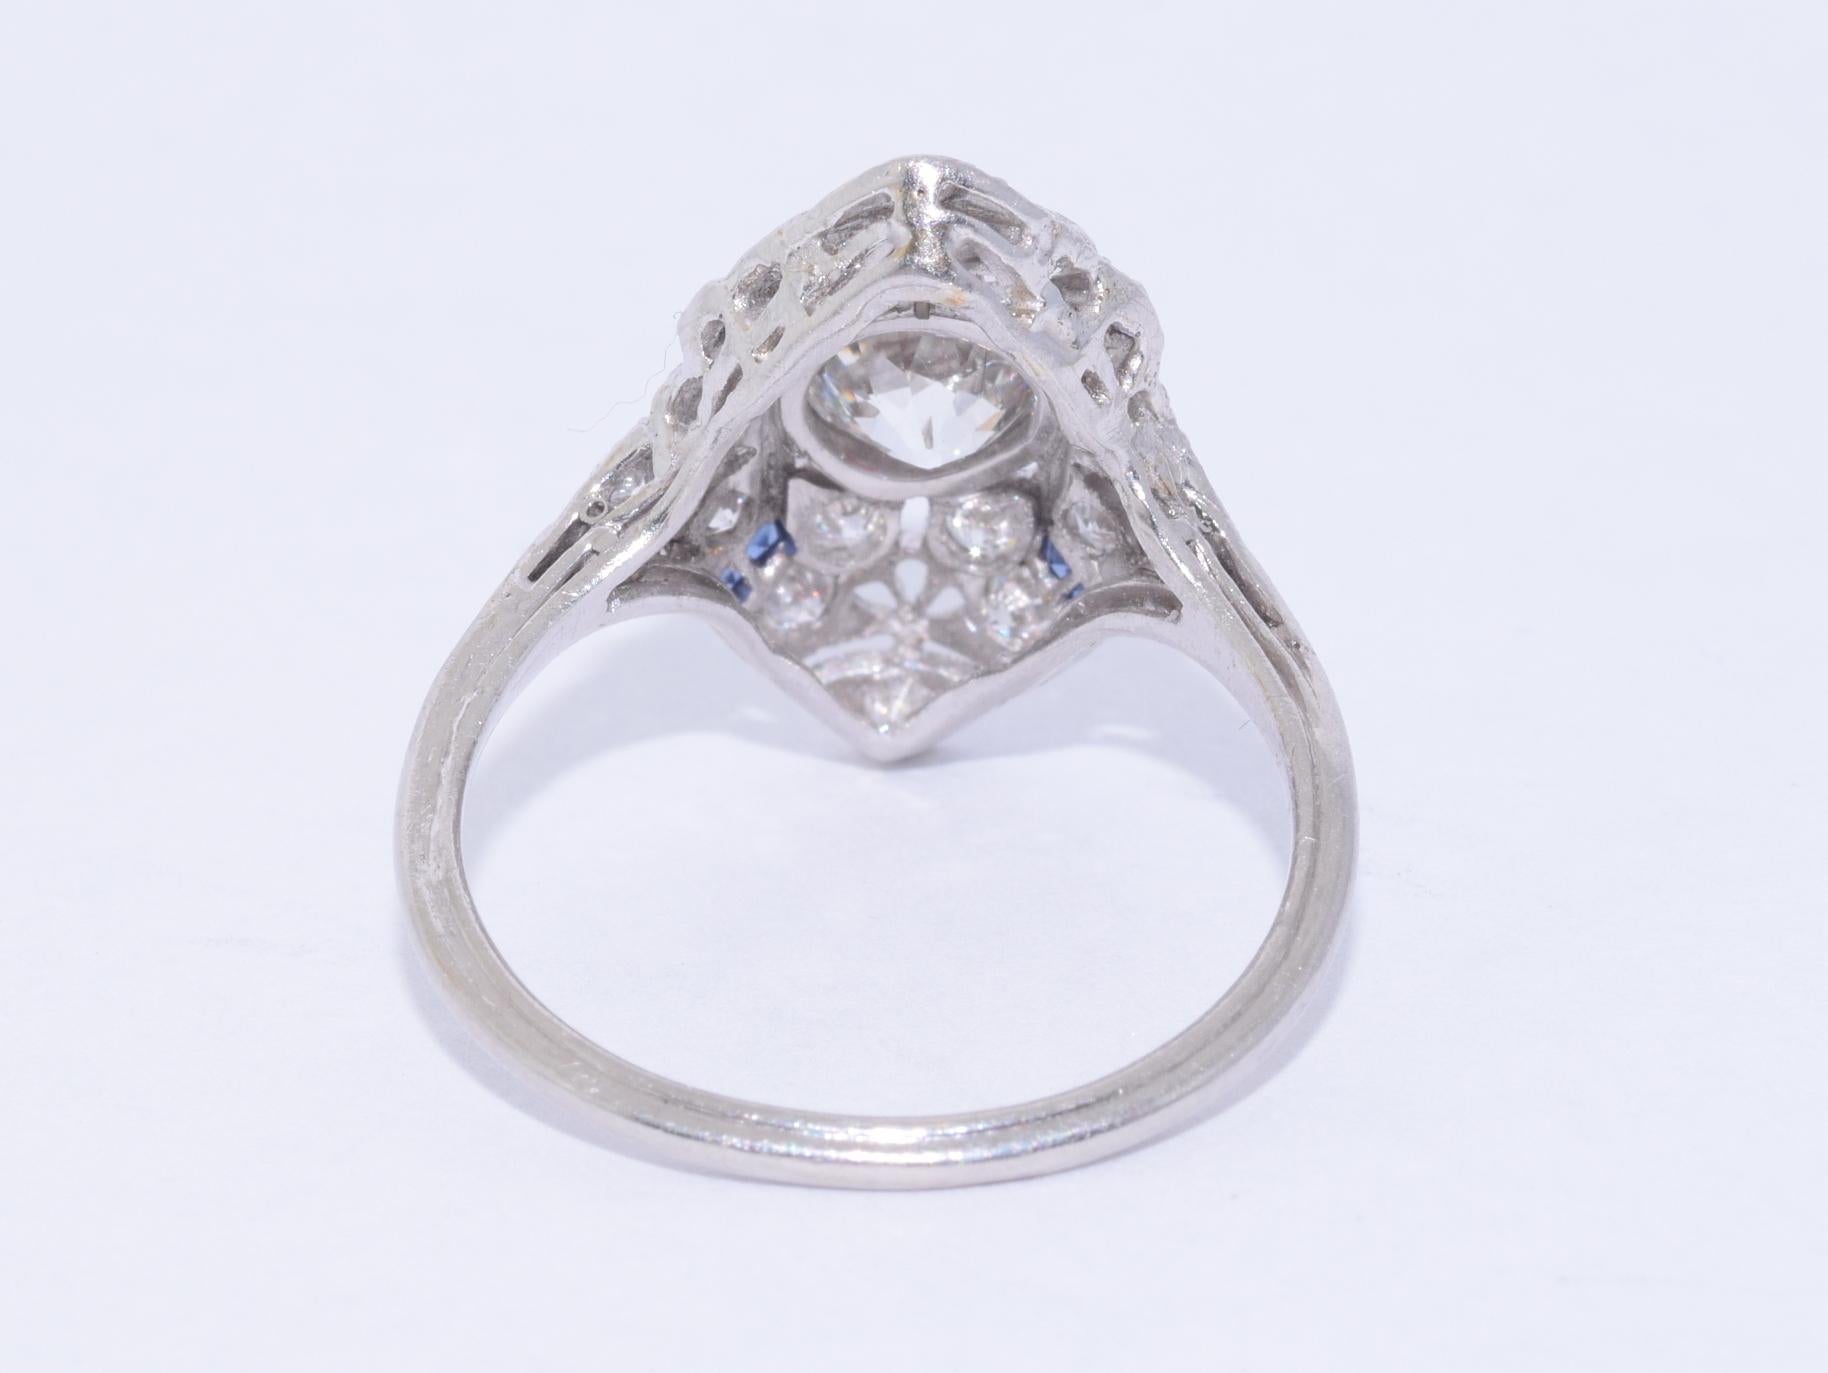 20s deco engagement ring